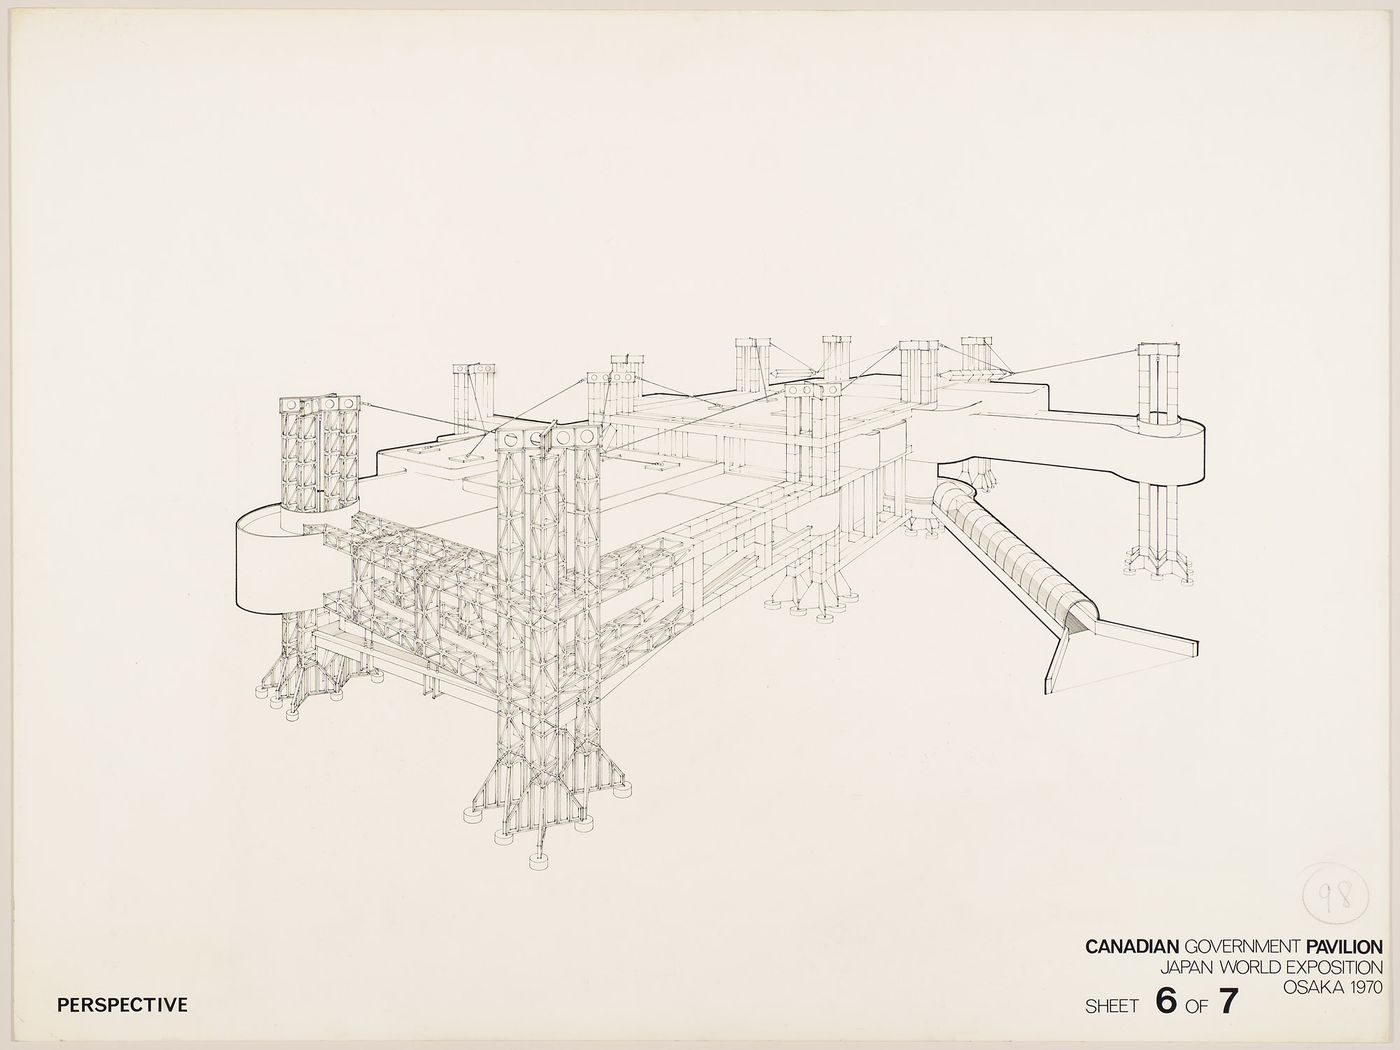 Perspective drawing for the Canadian Government Pavilion, Japan World Exposition, Osaka, Japan